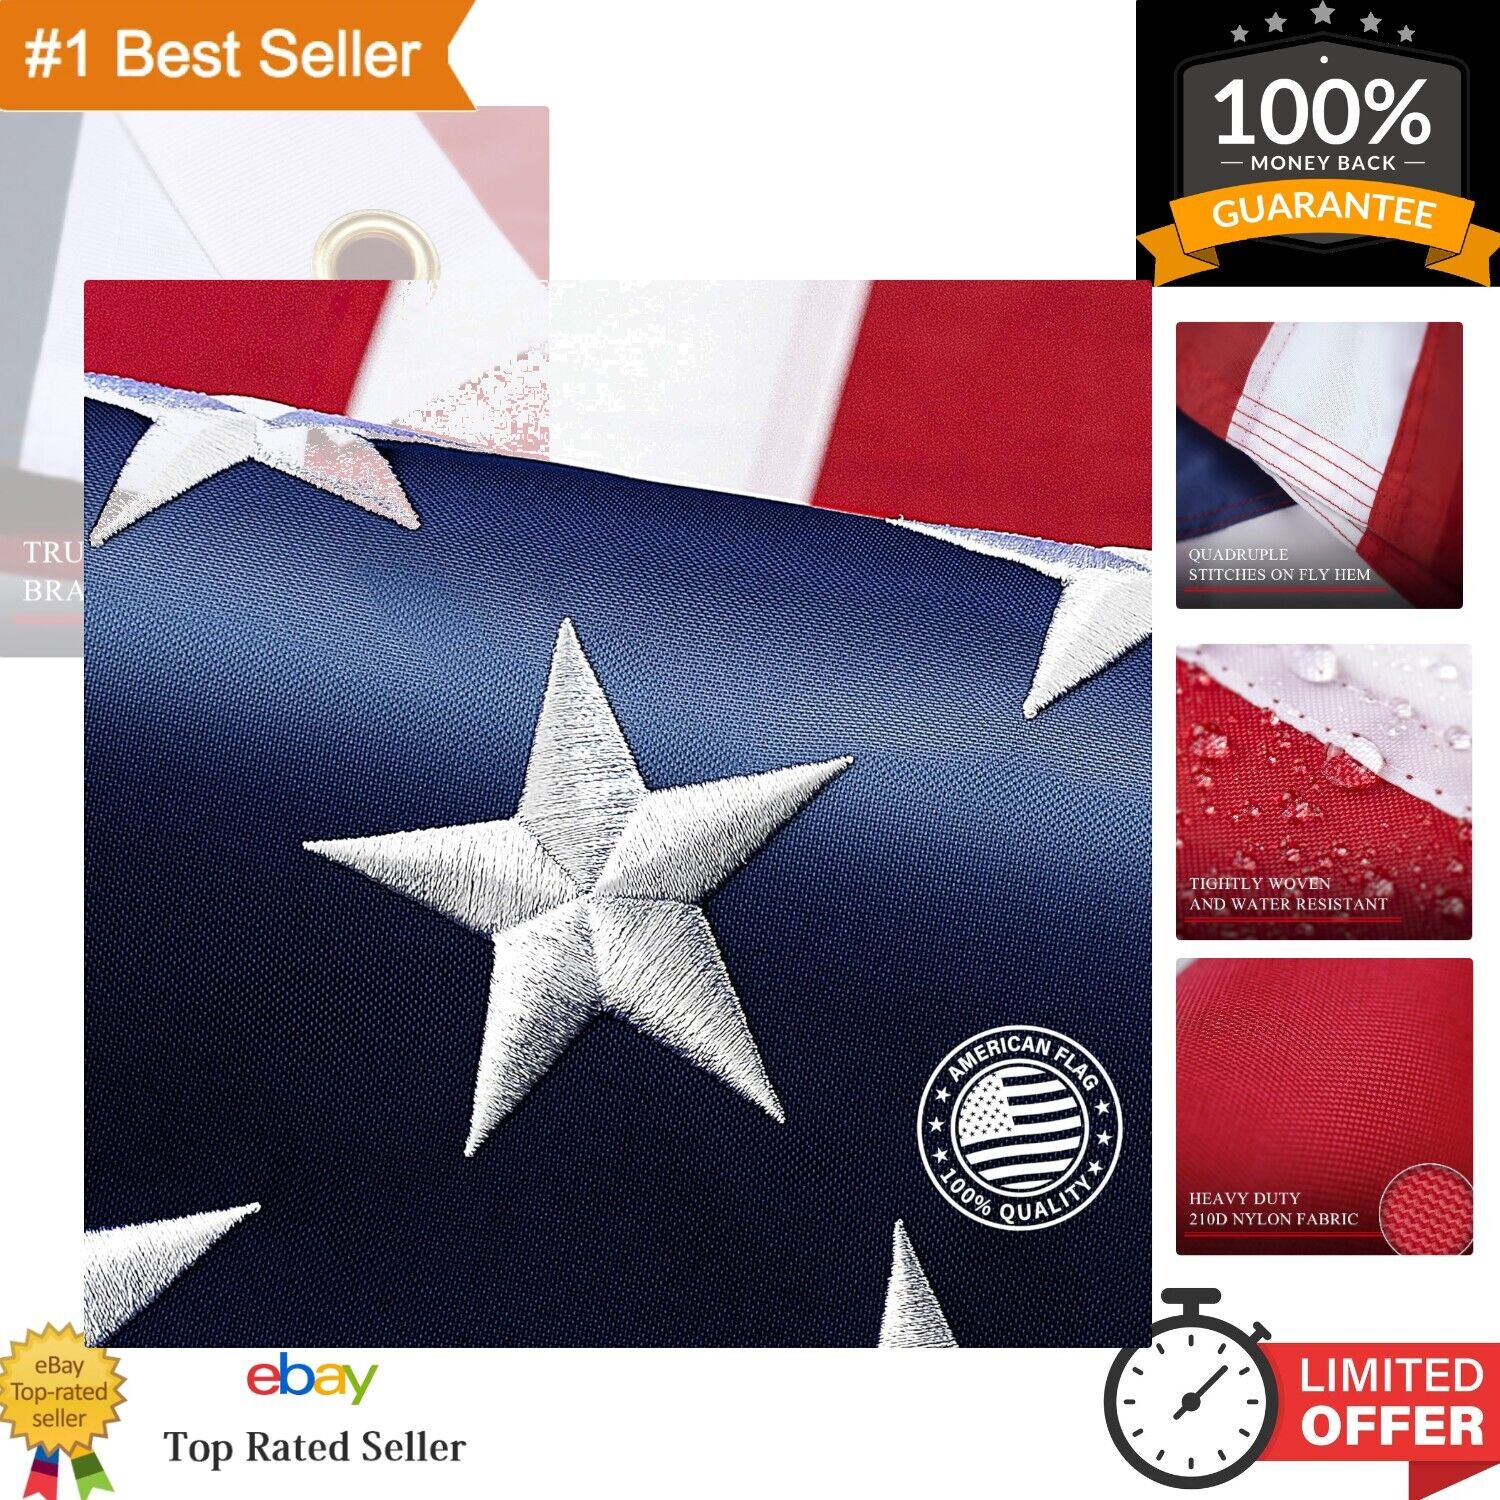 Durable Nylon American Flag - 8x12 ft - High Wind Resistant with Brass Grommets